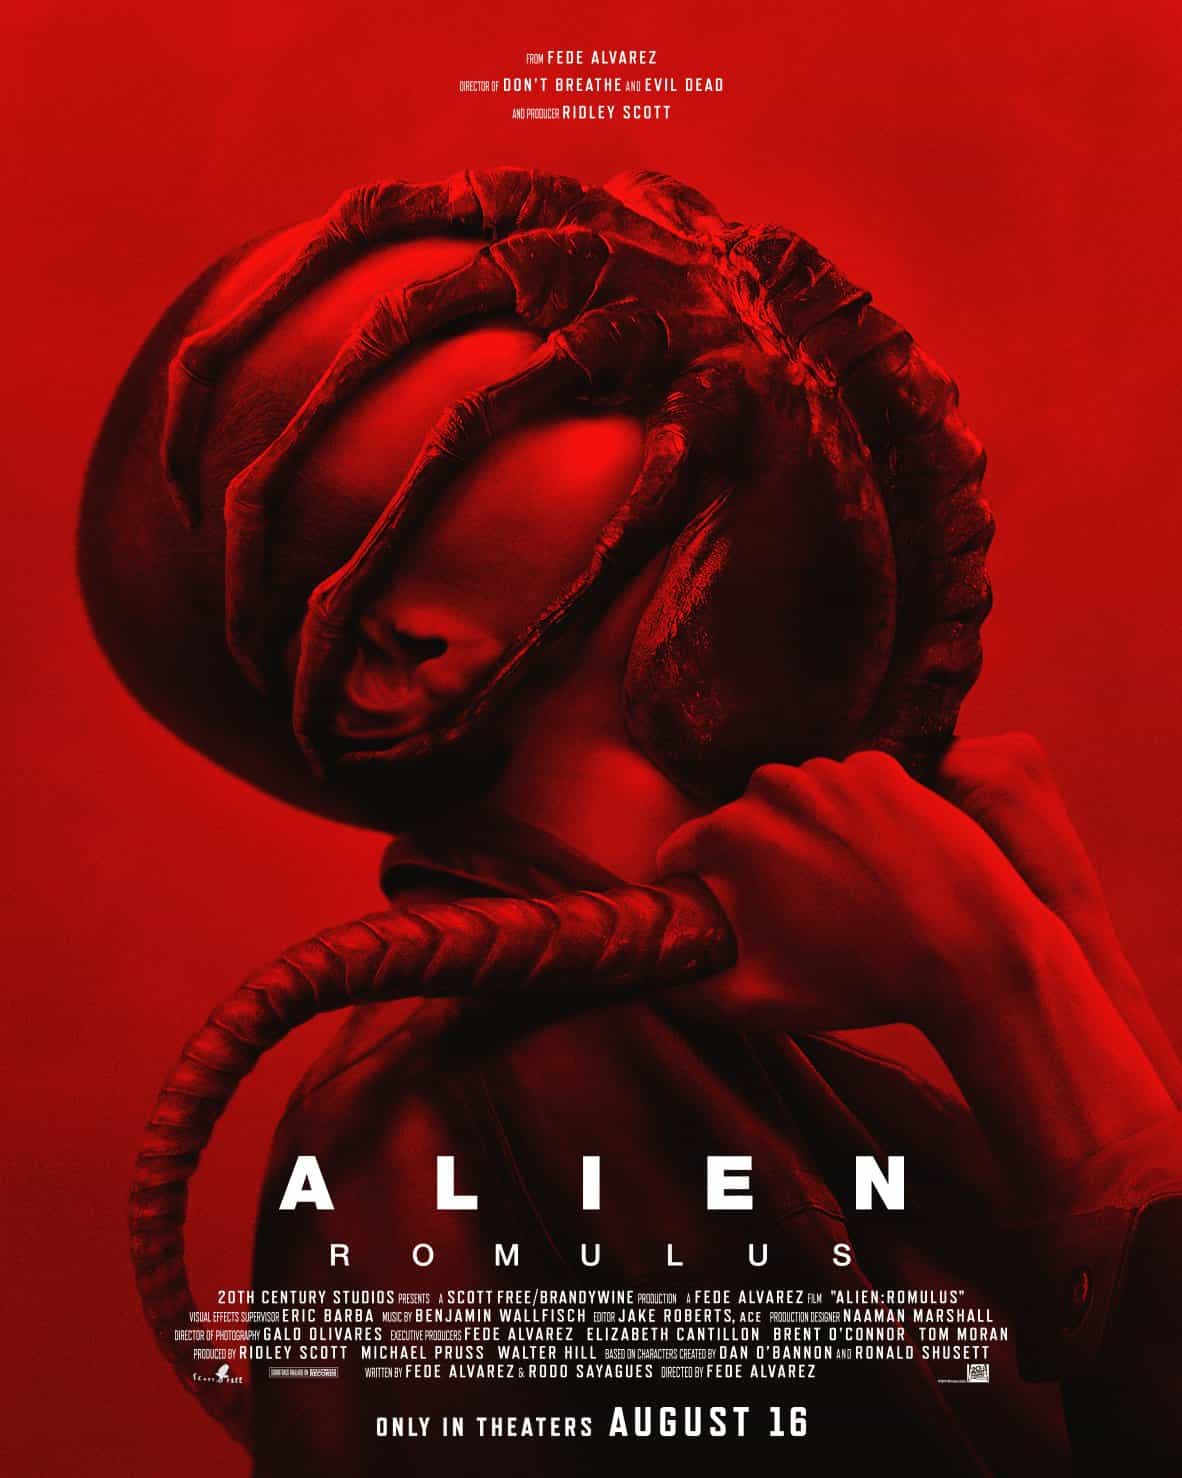 New poster has been released for Alien: Romulus ahead of a new trailer, movie stars Cailee Spaeny and Isabela Merced - movie UK release date 16th August 2024 #alienromulus